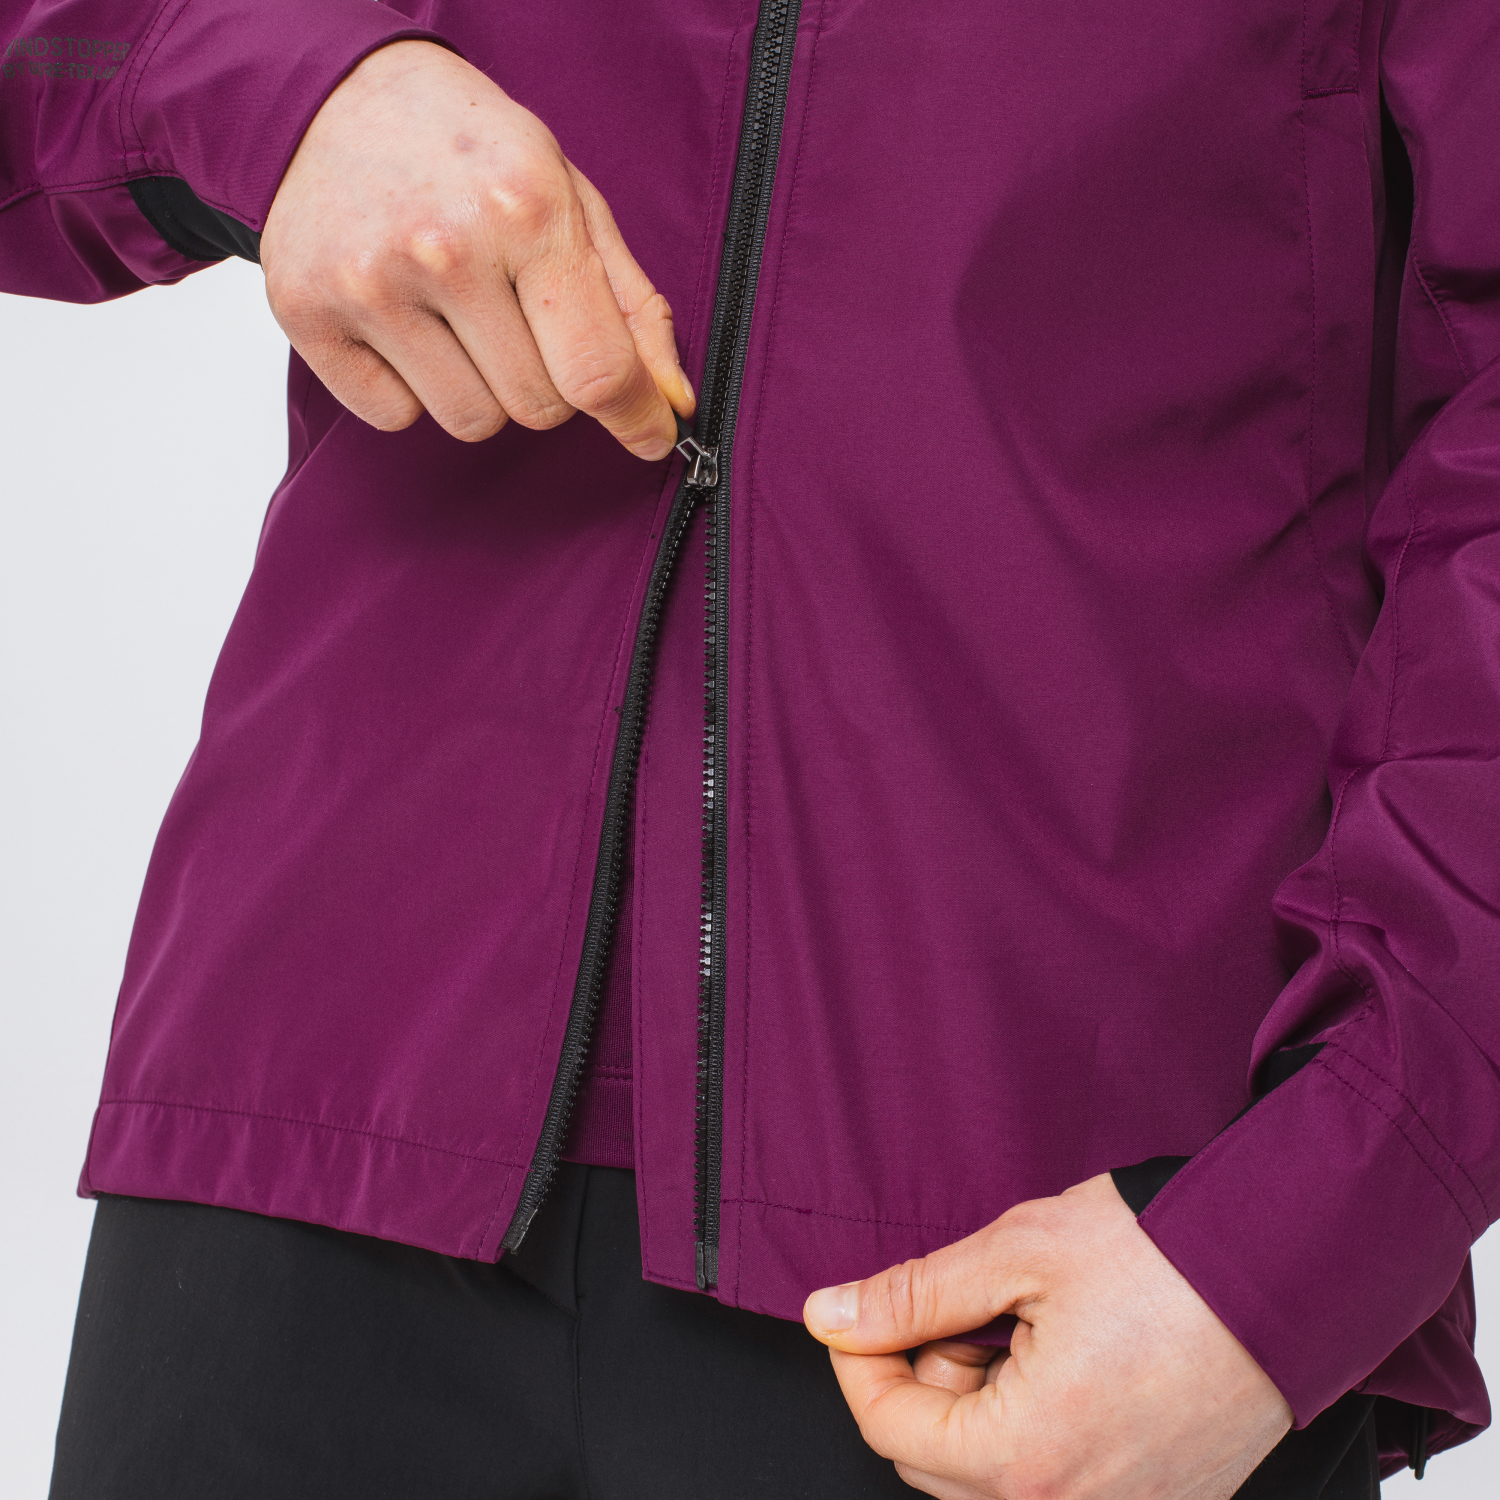 Dress for windy weather with Snickers Workwear's GORE WINDSTOPPER Jackets -  FMJ